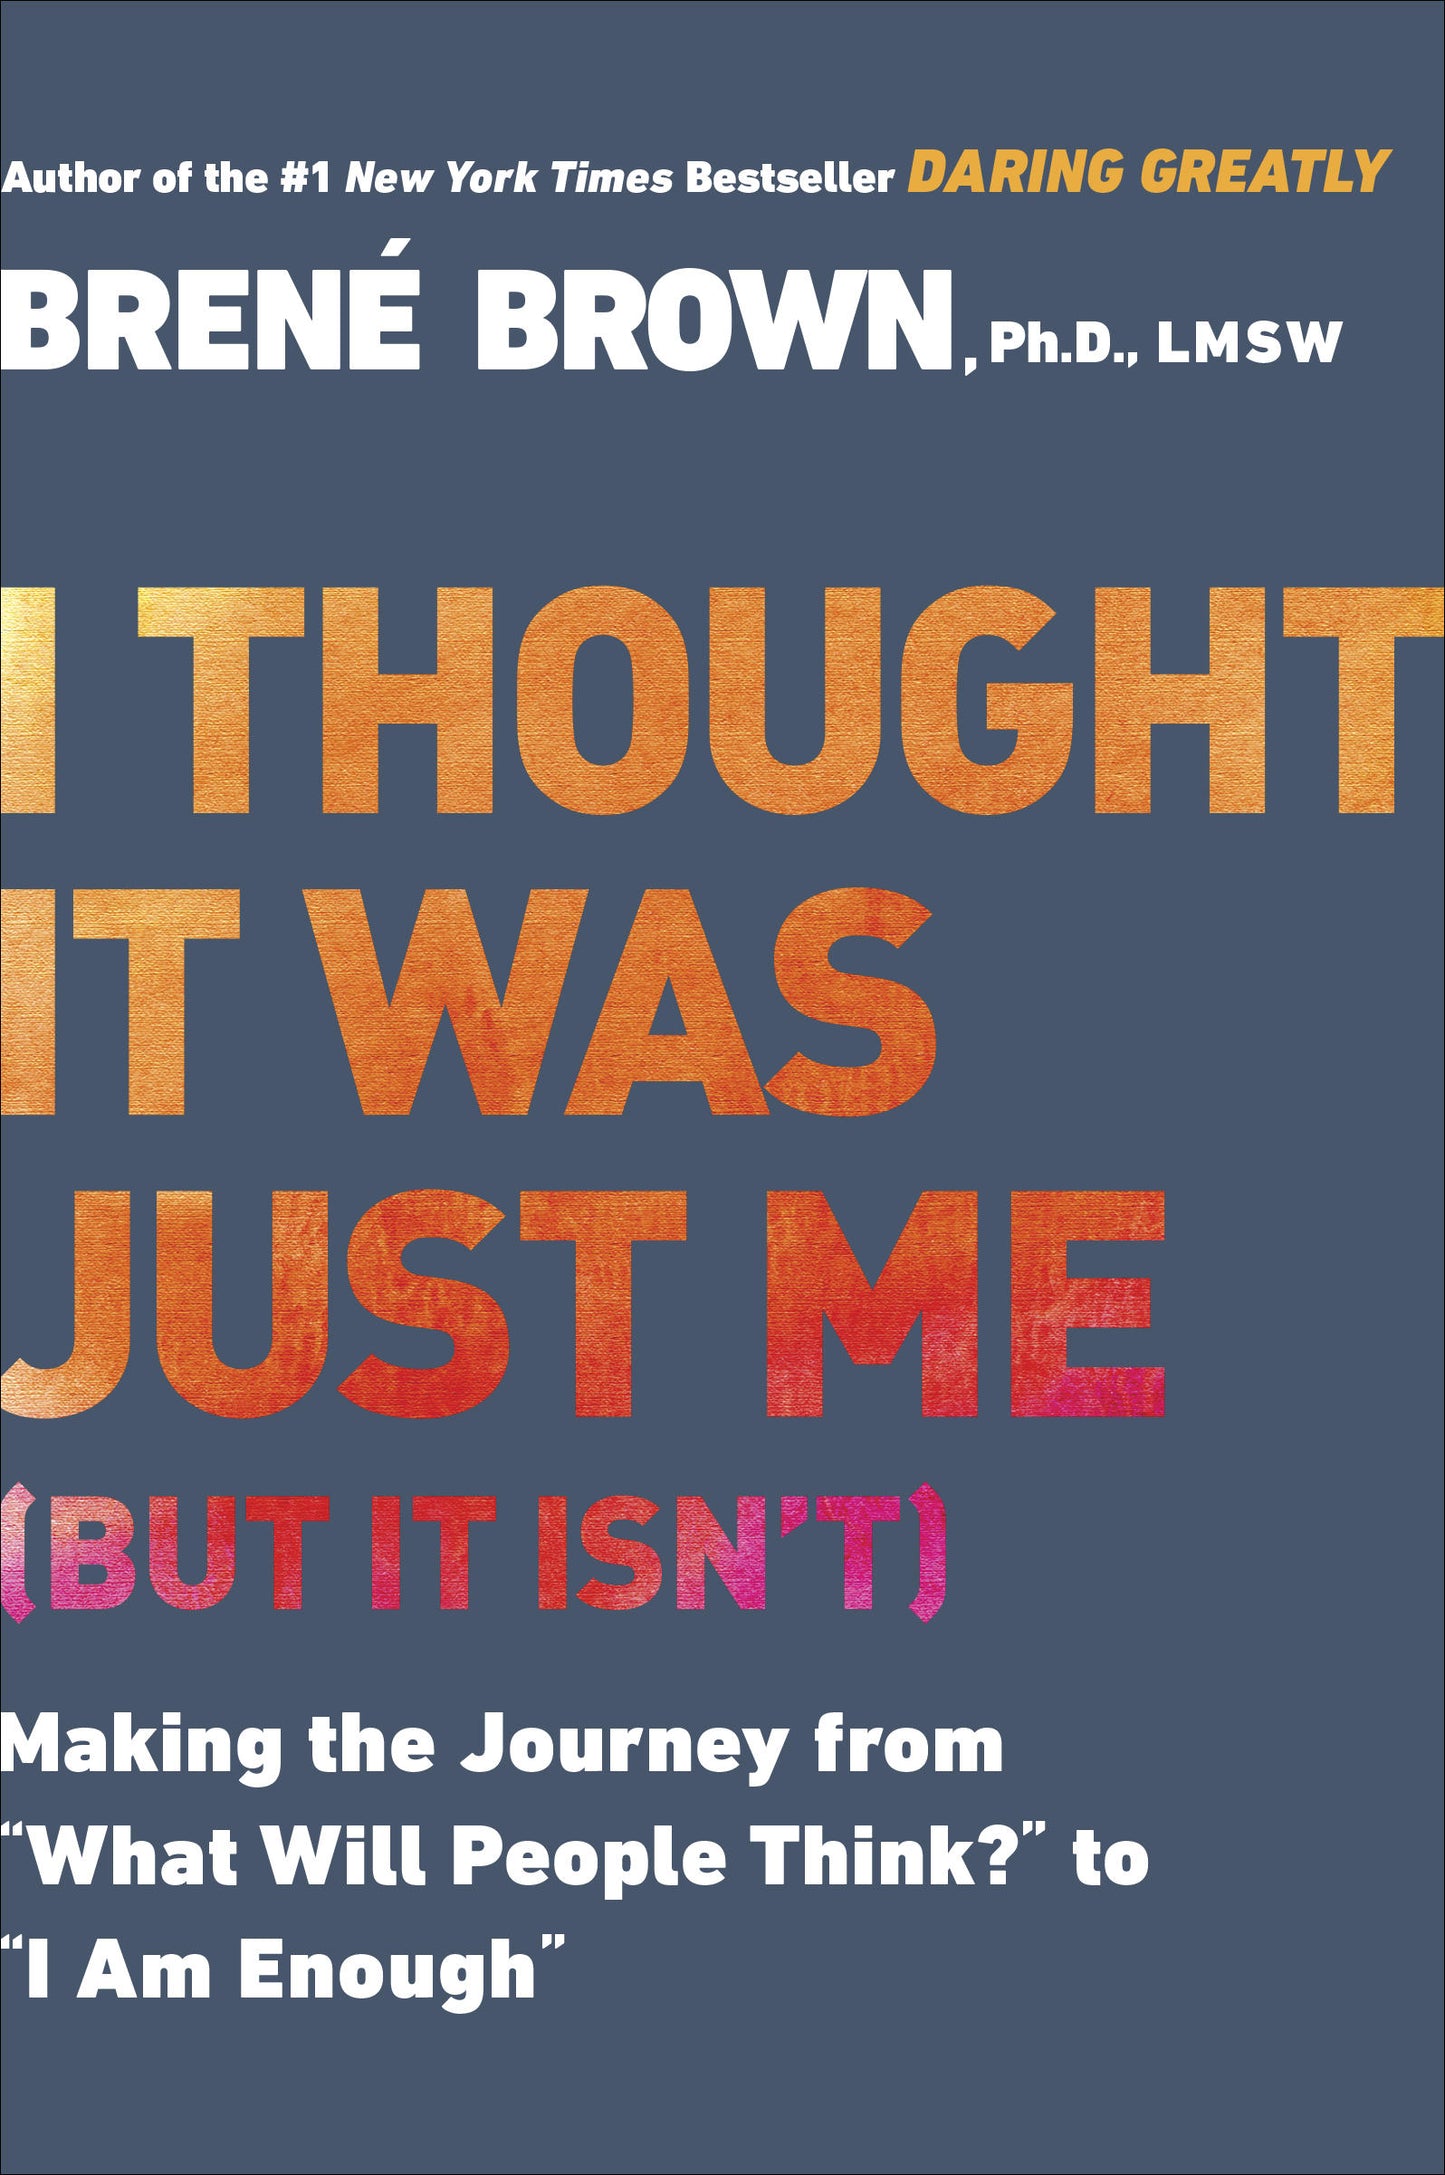 I Thought It Was Just Me (but it isn't): Making the Journey from "What Will People Think?" To "I Am Enough" by Brené Brown